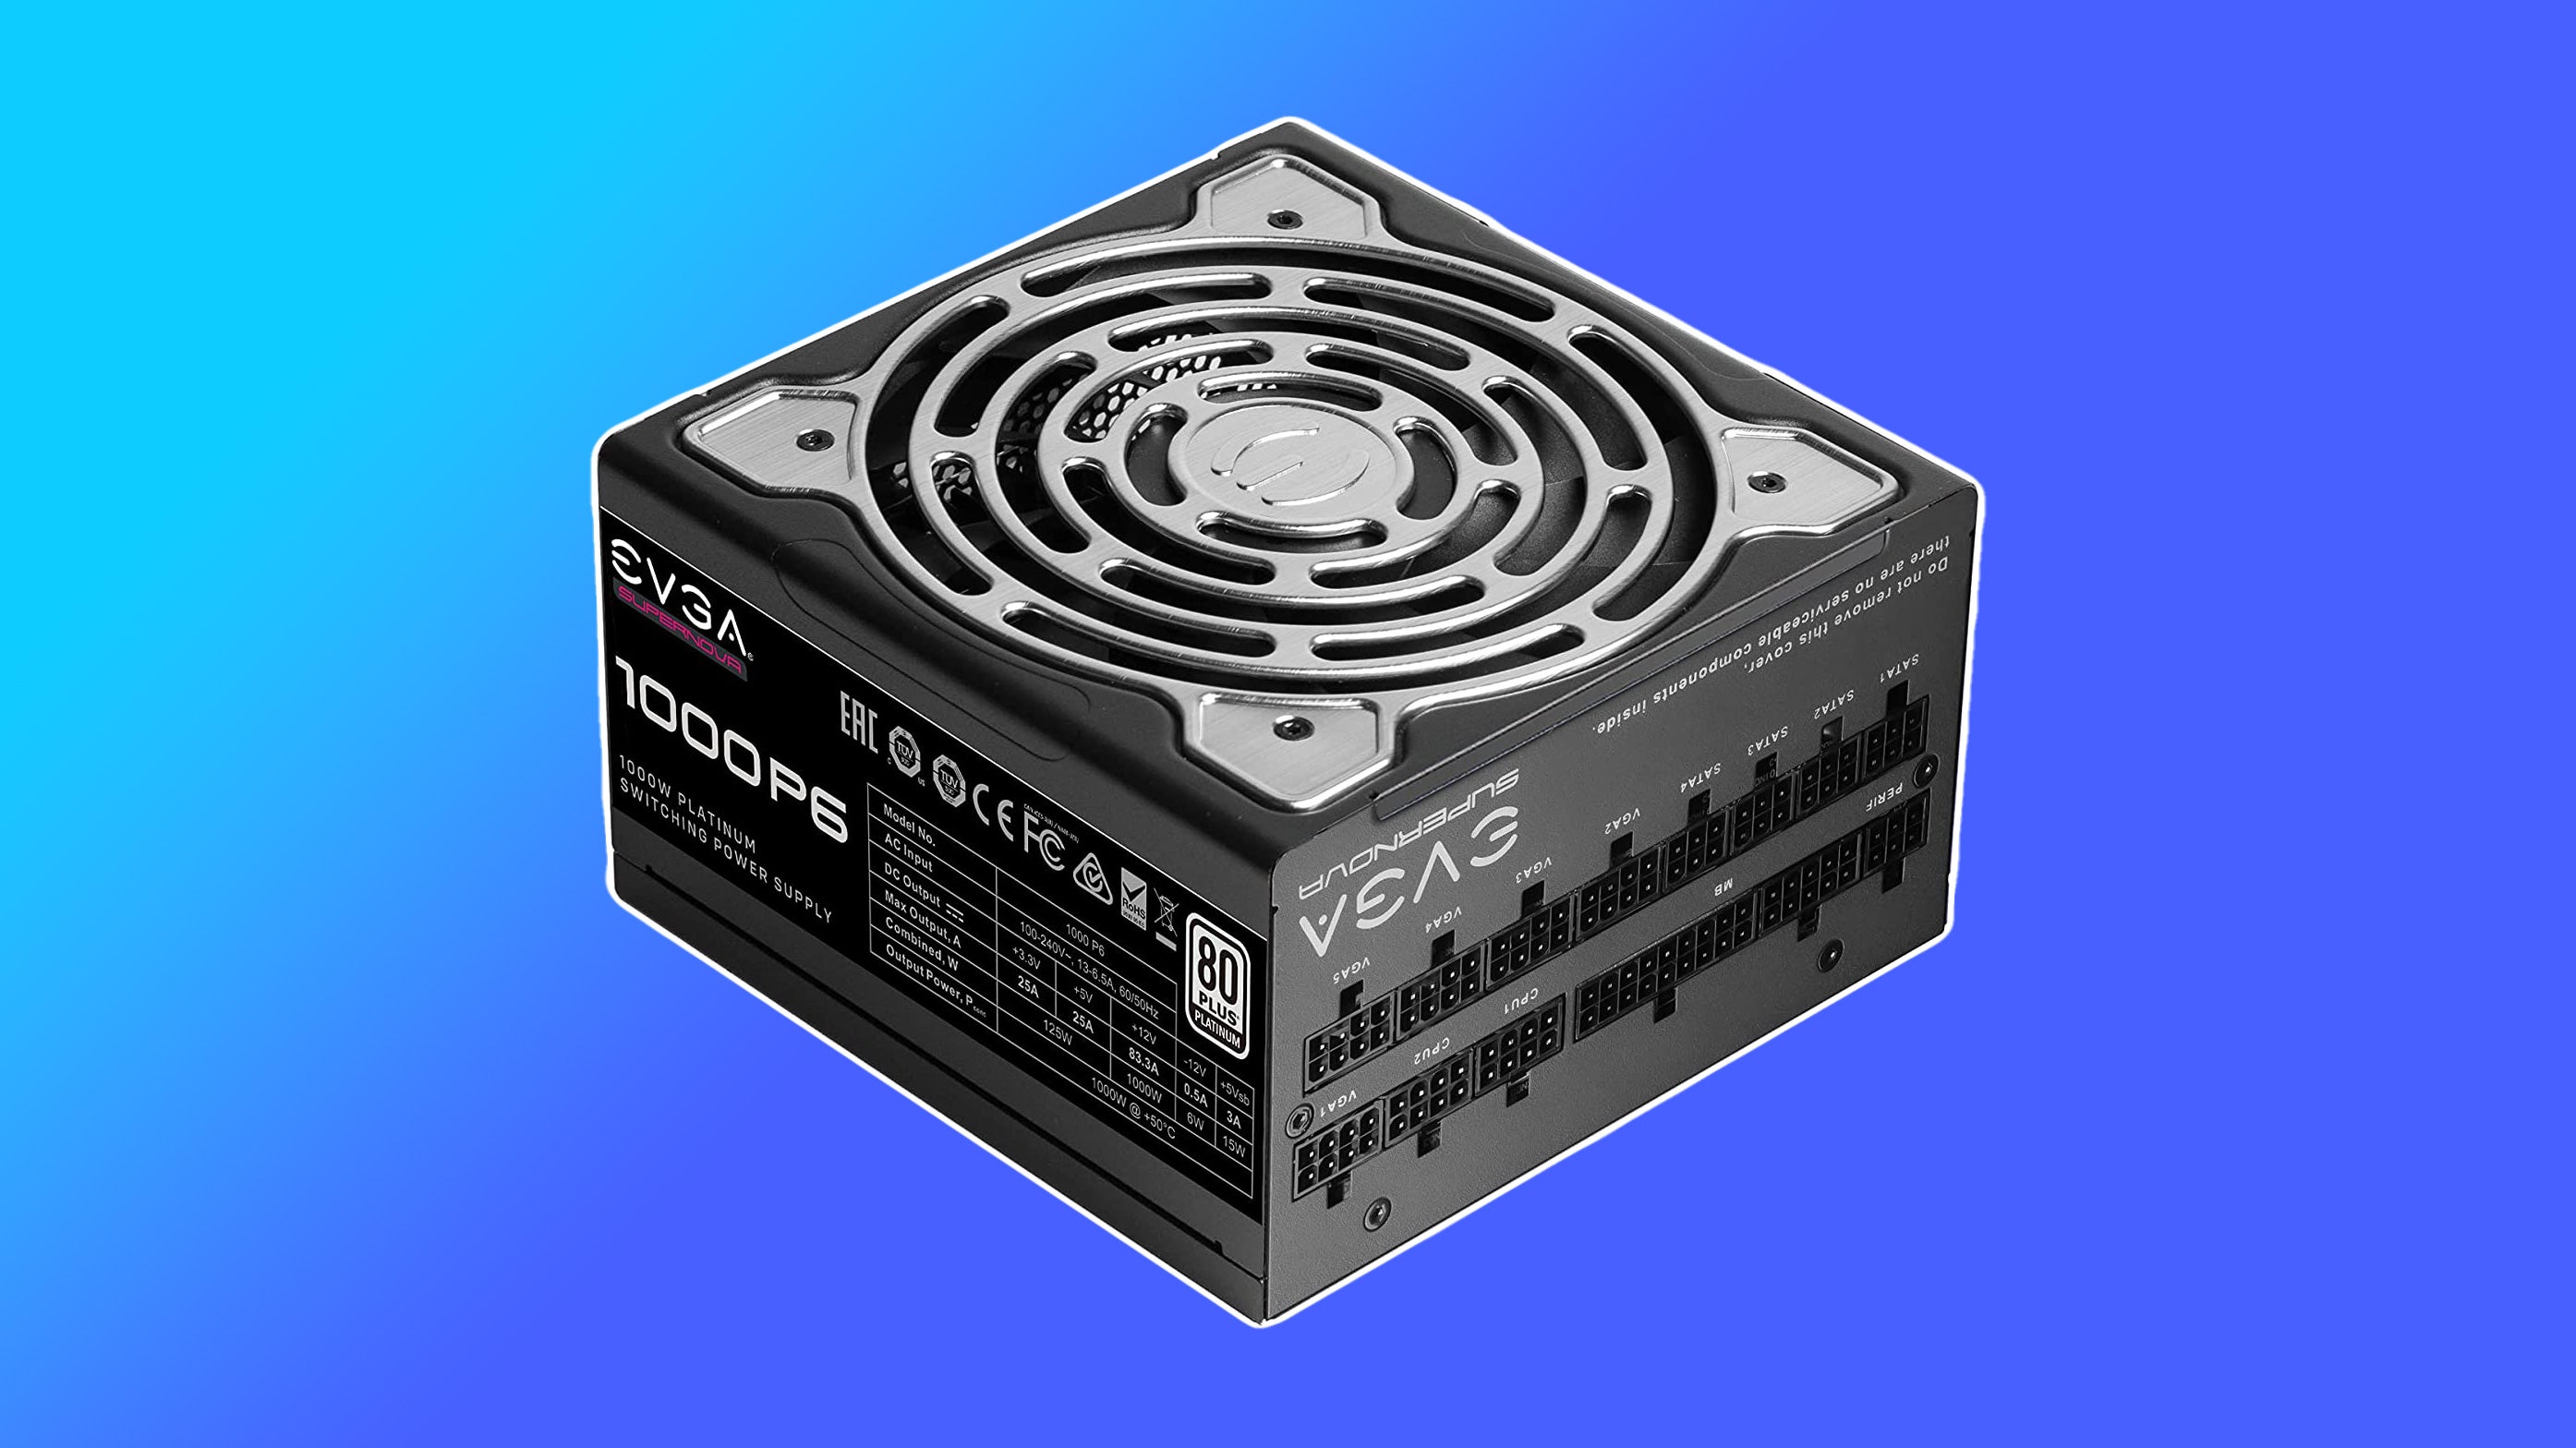 evga 1000w 1000p6 power supply, showing a modular design and metal components